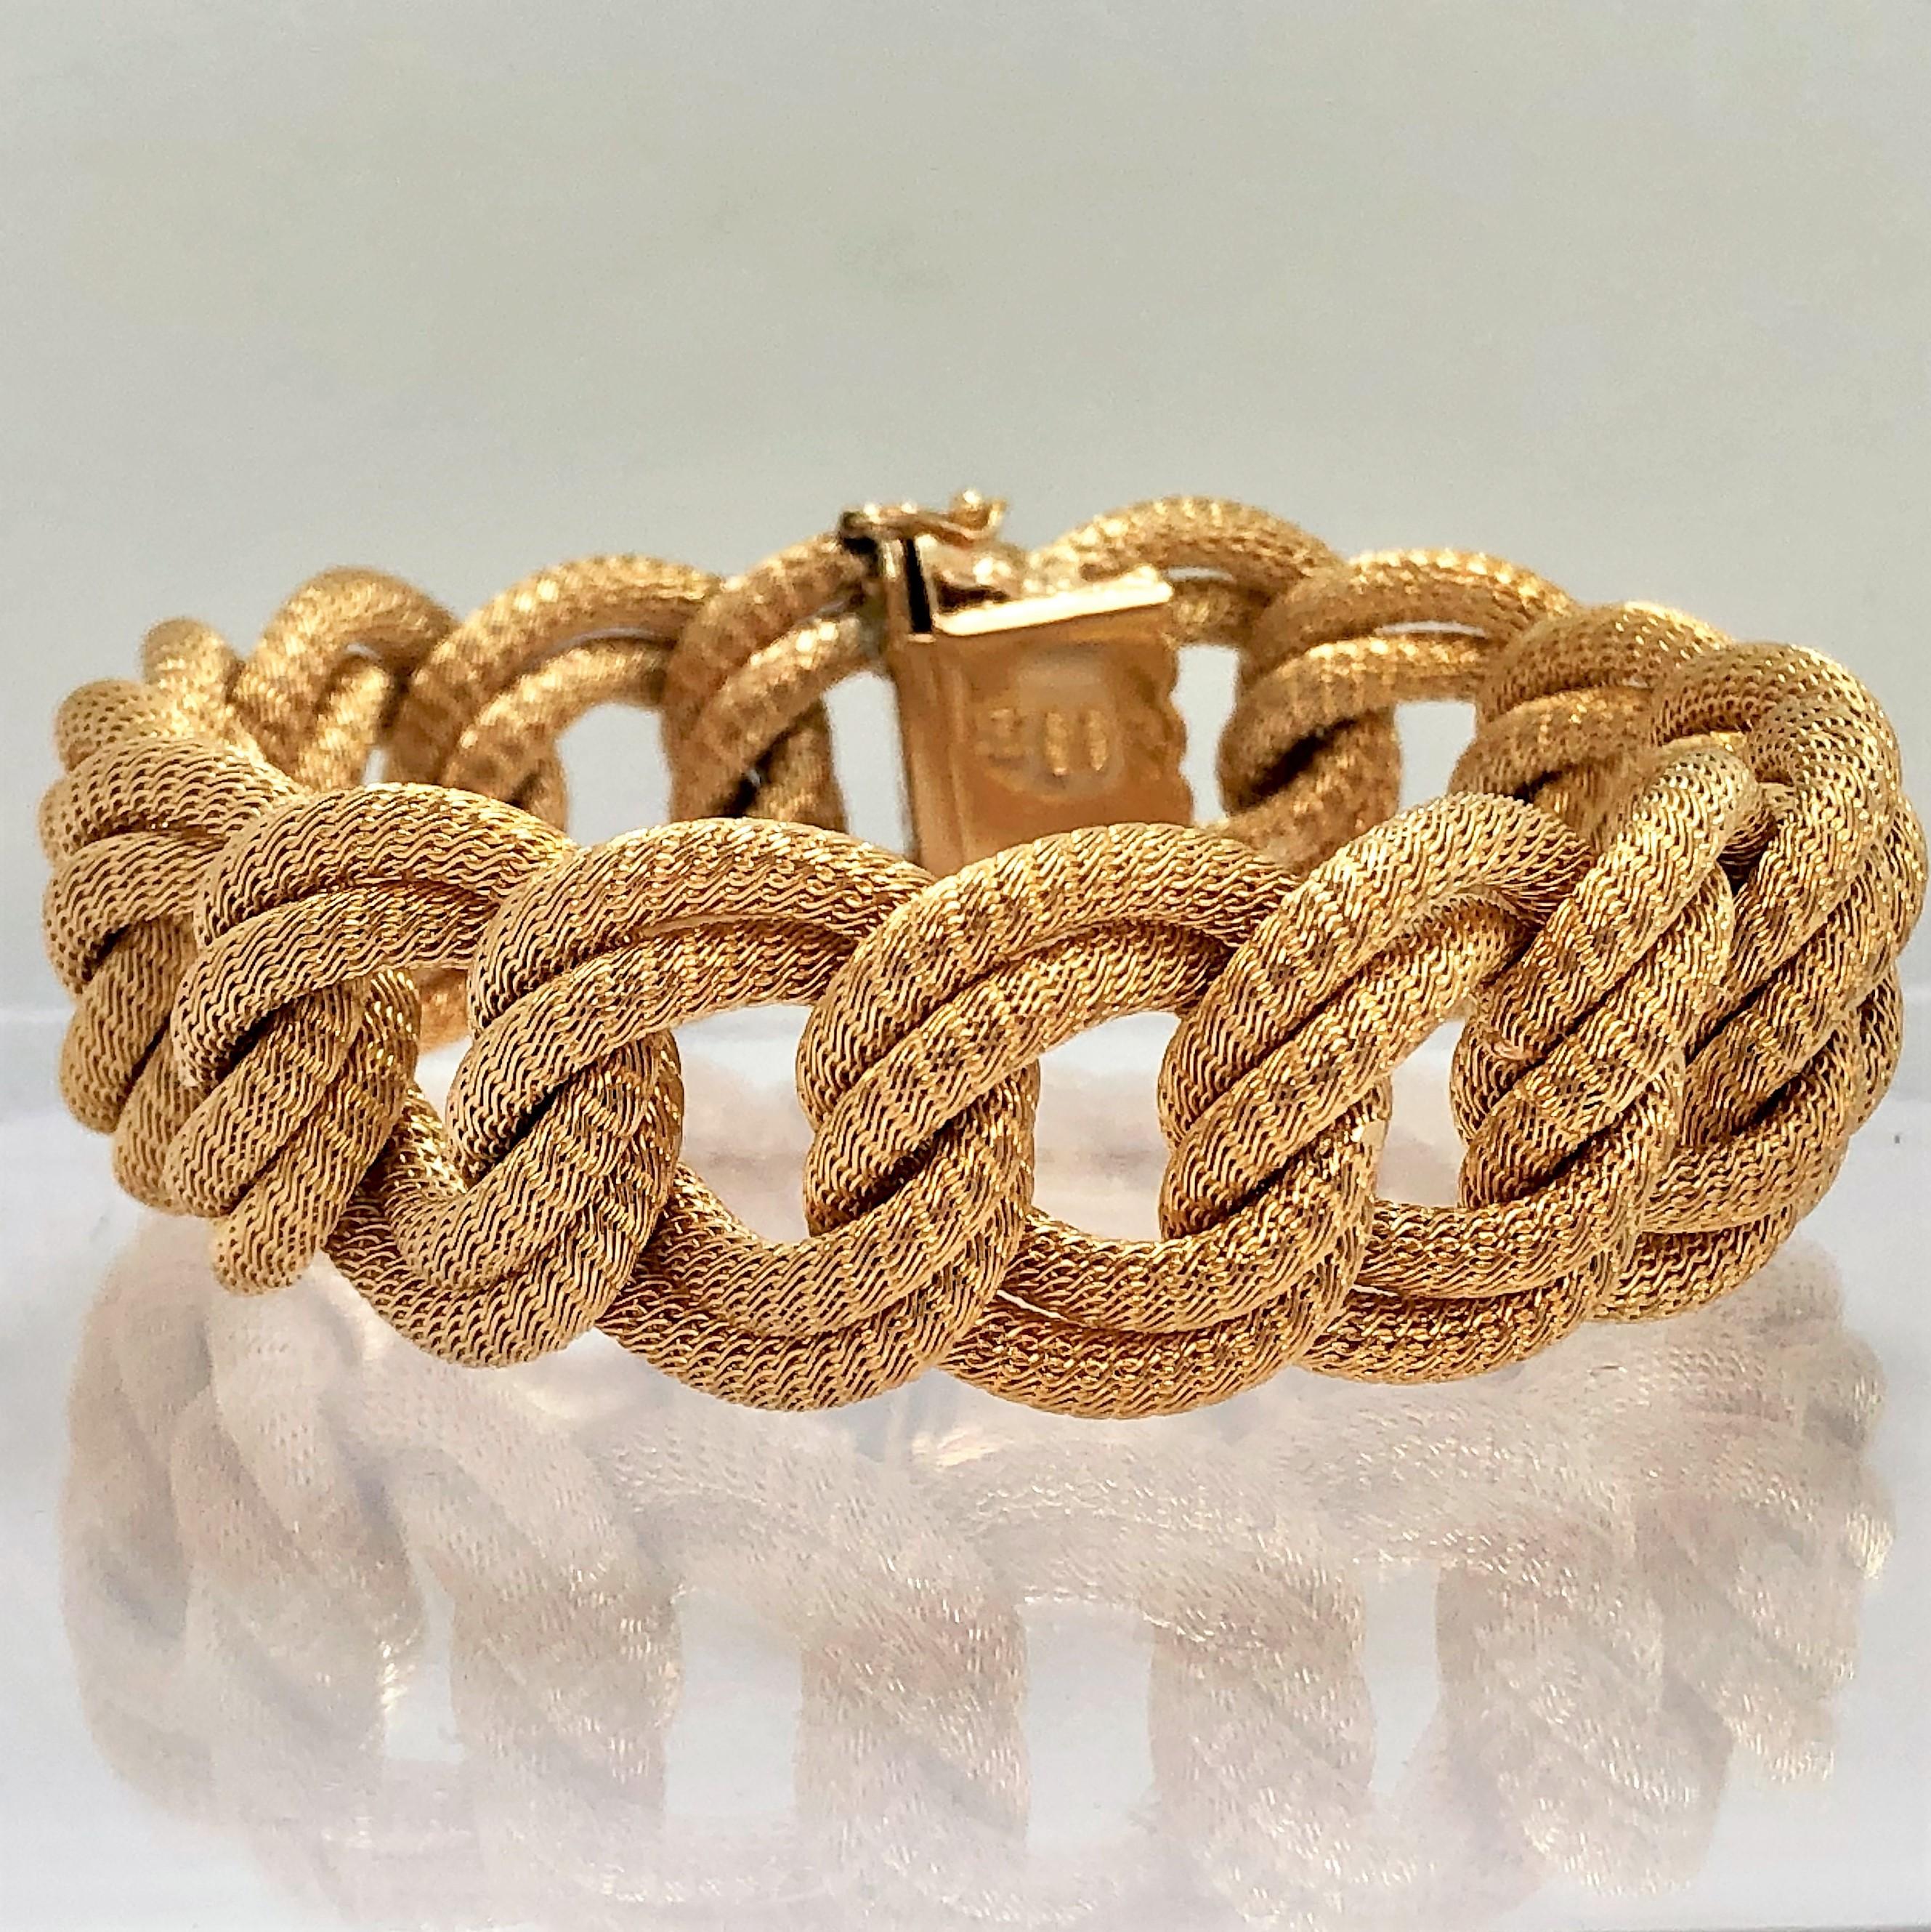 Made in the Verona region of Italy during the 1960's-1970's, this classic 
18K Yellow Gold, woven mesh link bracelet is both graceful and elegant. 
This is a fine example of the Italian gold weaving art.
Measuring a full 7 1/2 inches long by just